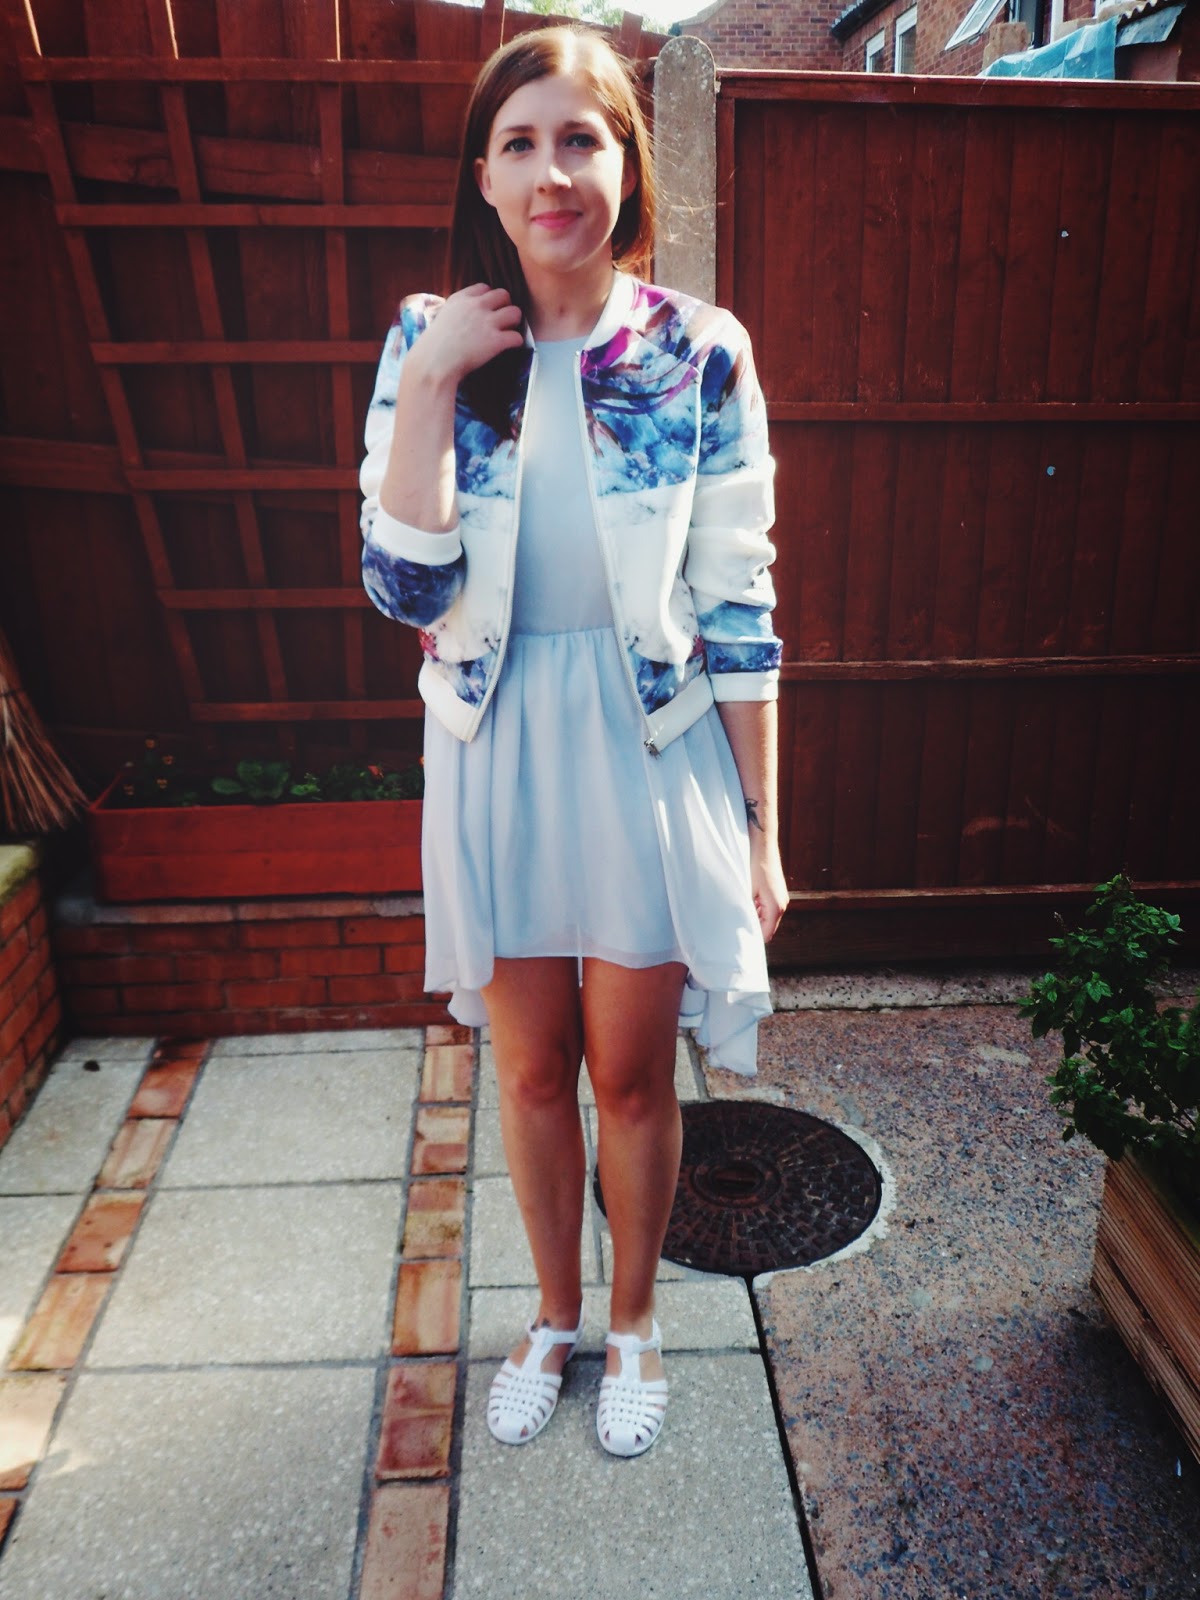 ASOS, asseenonme, bomberjacket, fblogger, fbloggers, jellyshoes, missguided, dress, newlook, ootd, outfitoftheday, summer, whatibought, whatimwearing, wiw